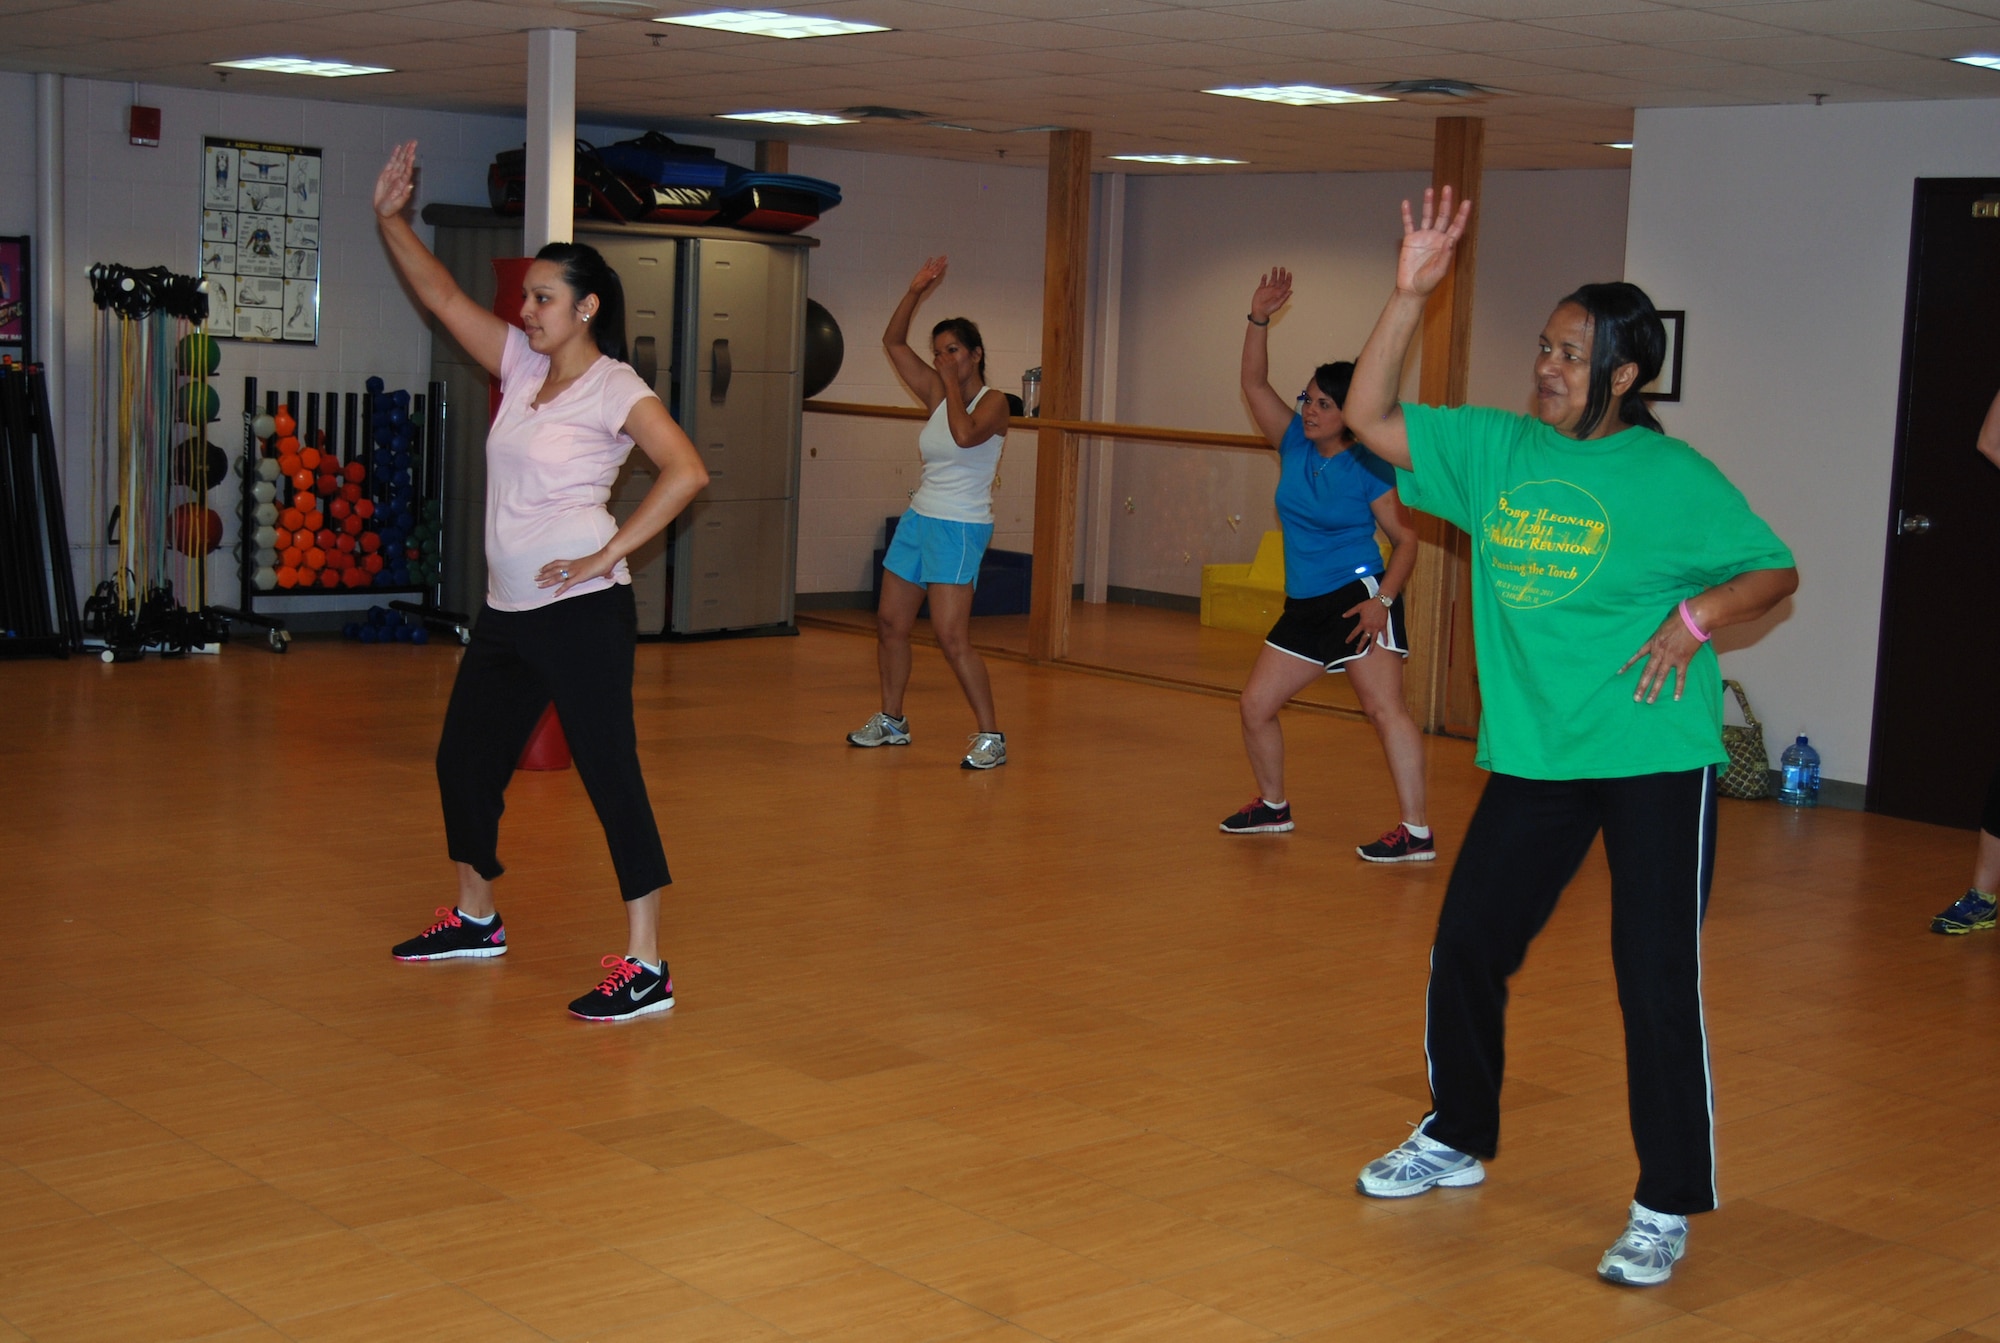 Zumba classes have returned to the fitness center for a three-month trial period. To cover the cost of the instructors, the fitness center is charging $3 per class or $35 for an unlimited monthly pass. (U.S. Air Force photo/Lea Johnson)